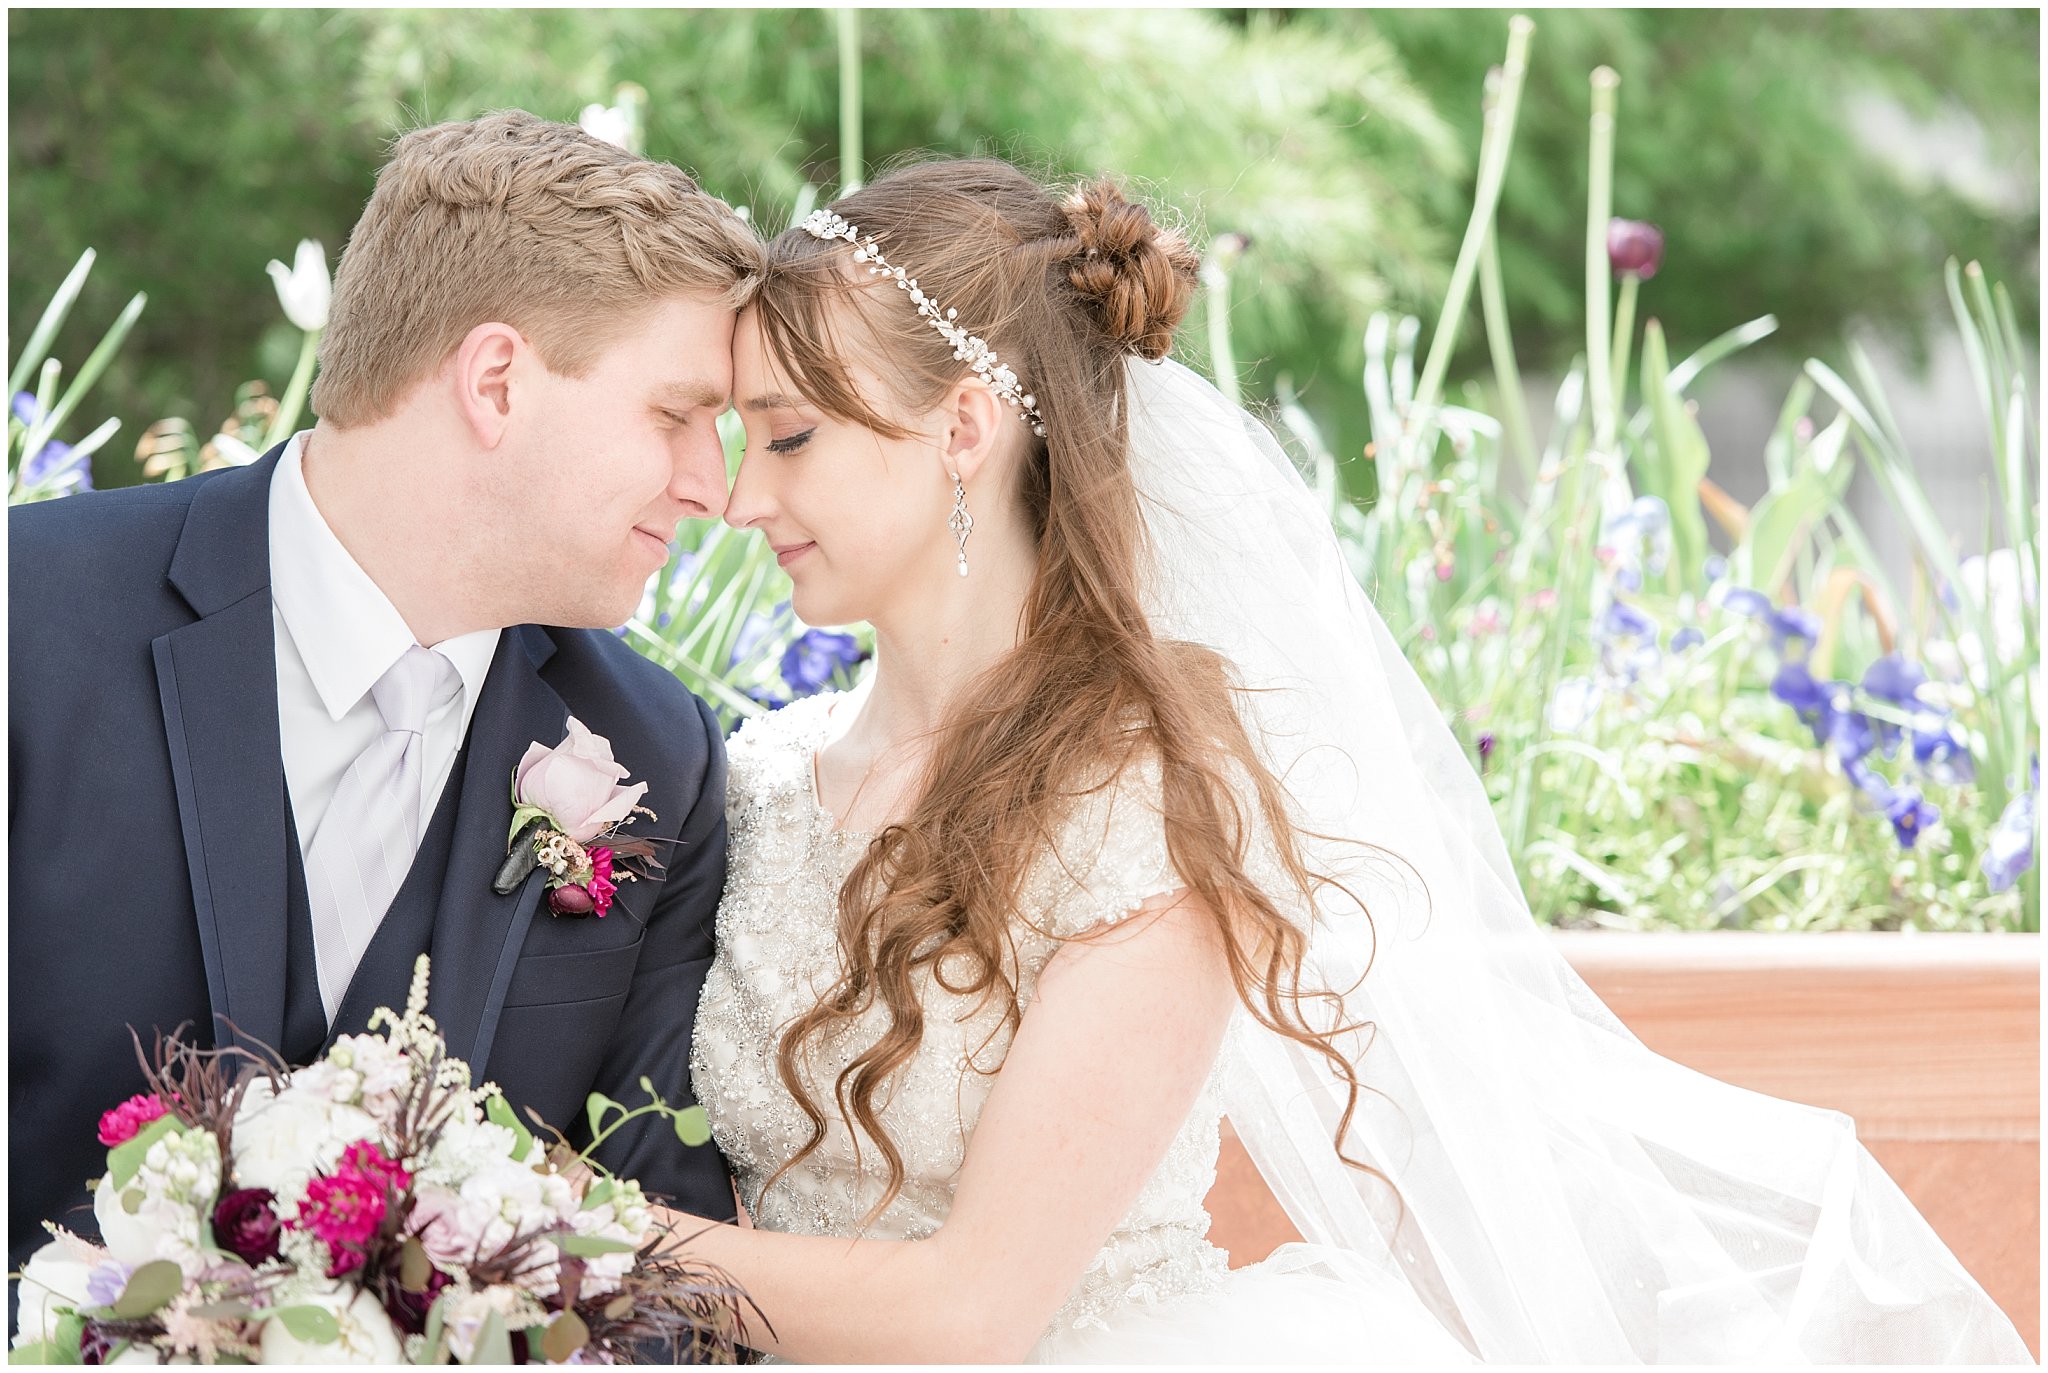 Bride and groom close up | Wedding Day photography | Jessie and Dallin Photography